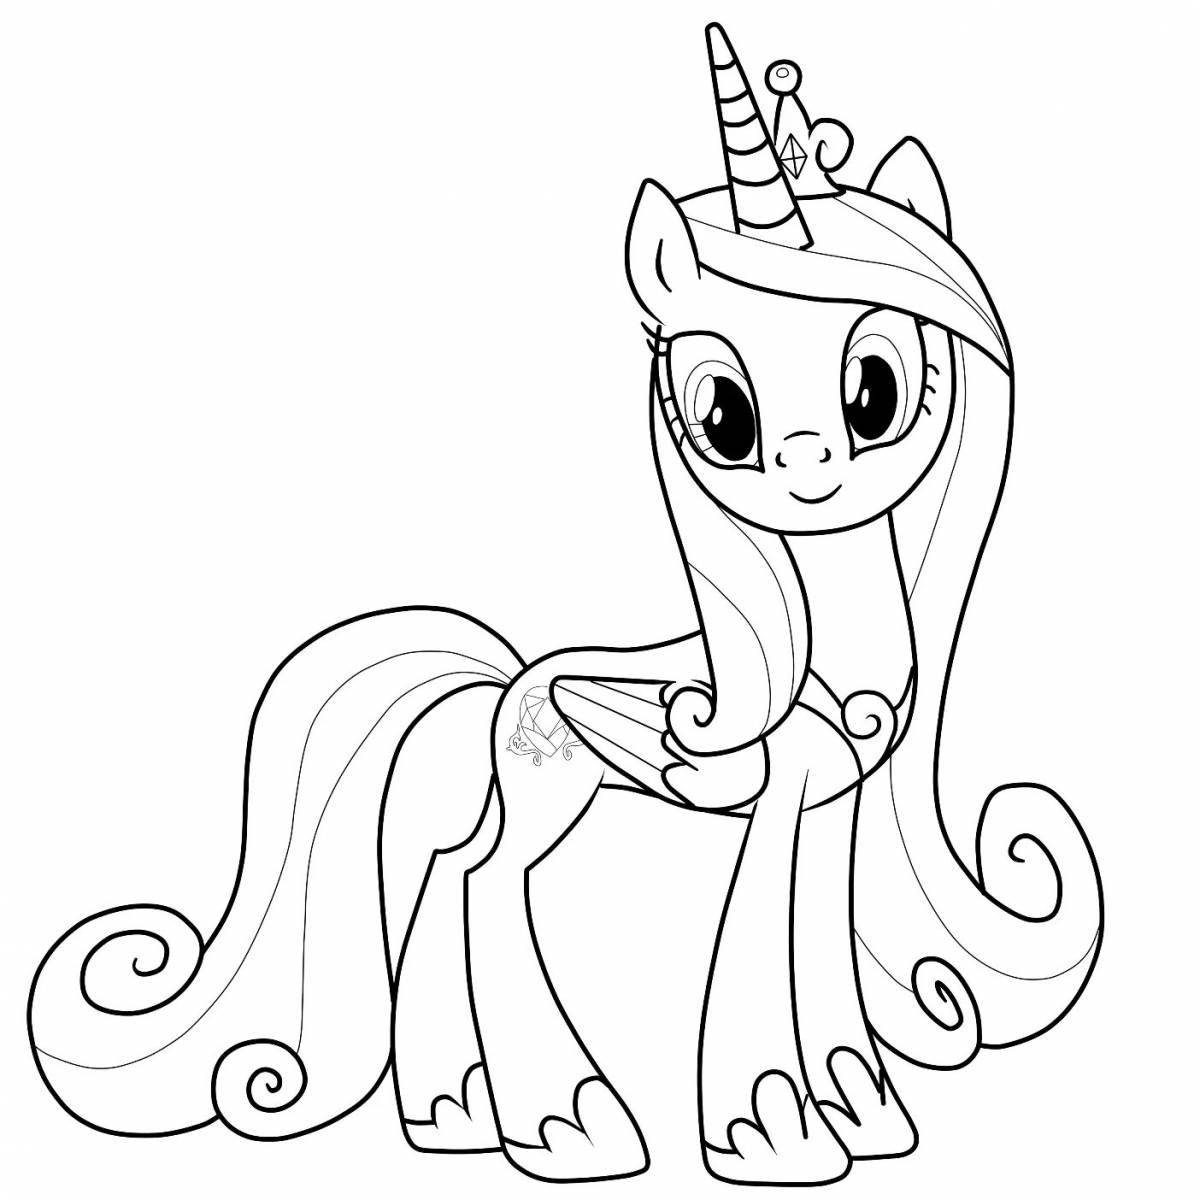 Coloring book sparkling little pony